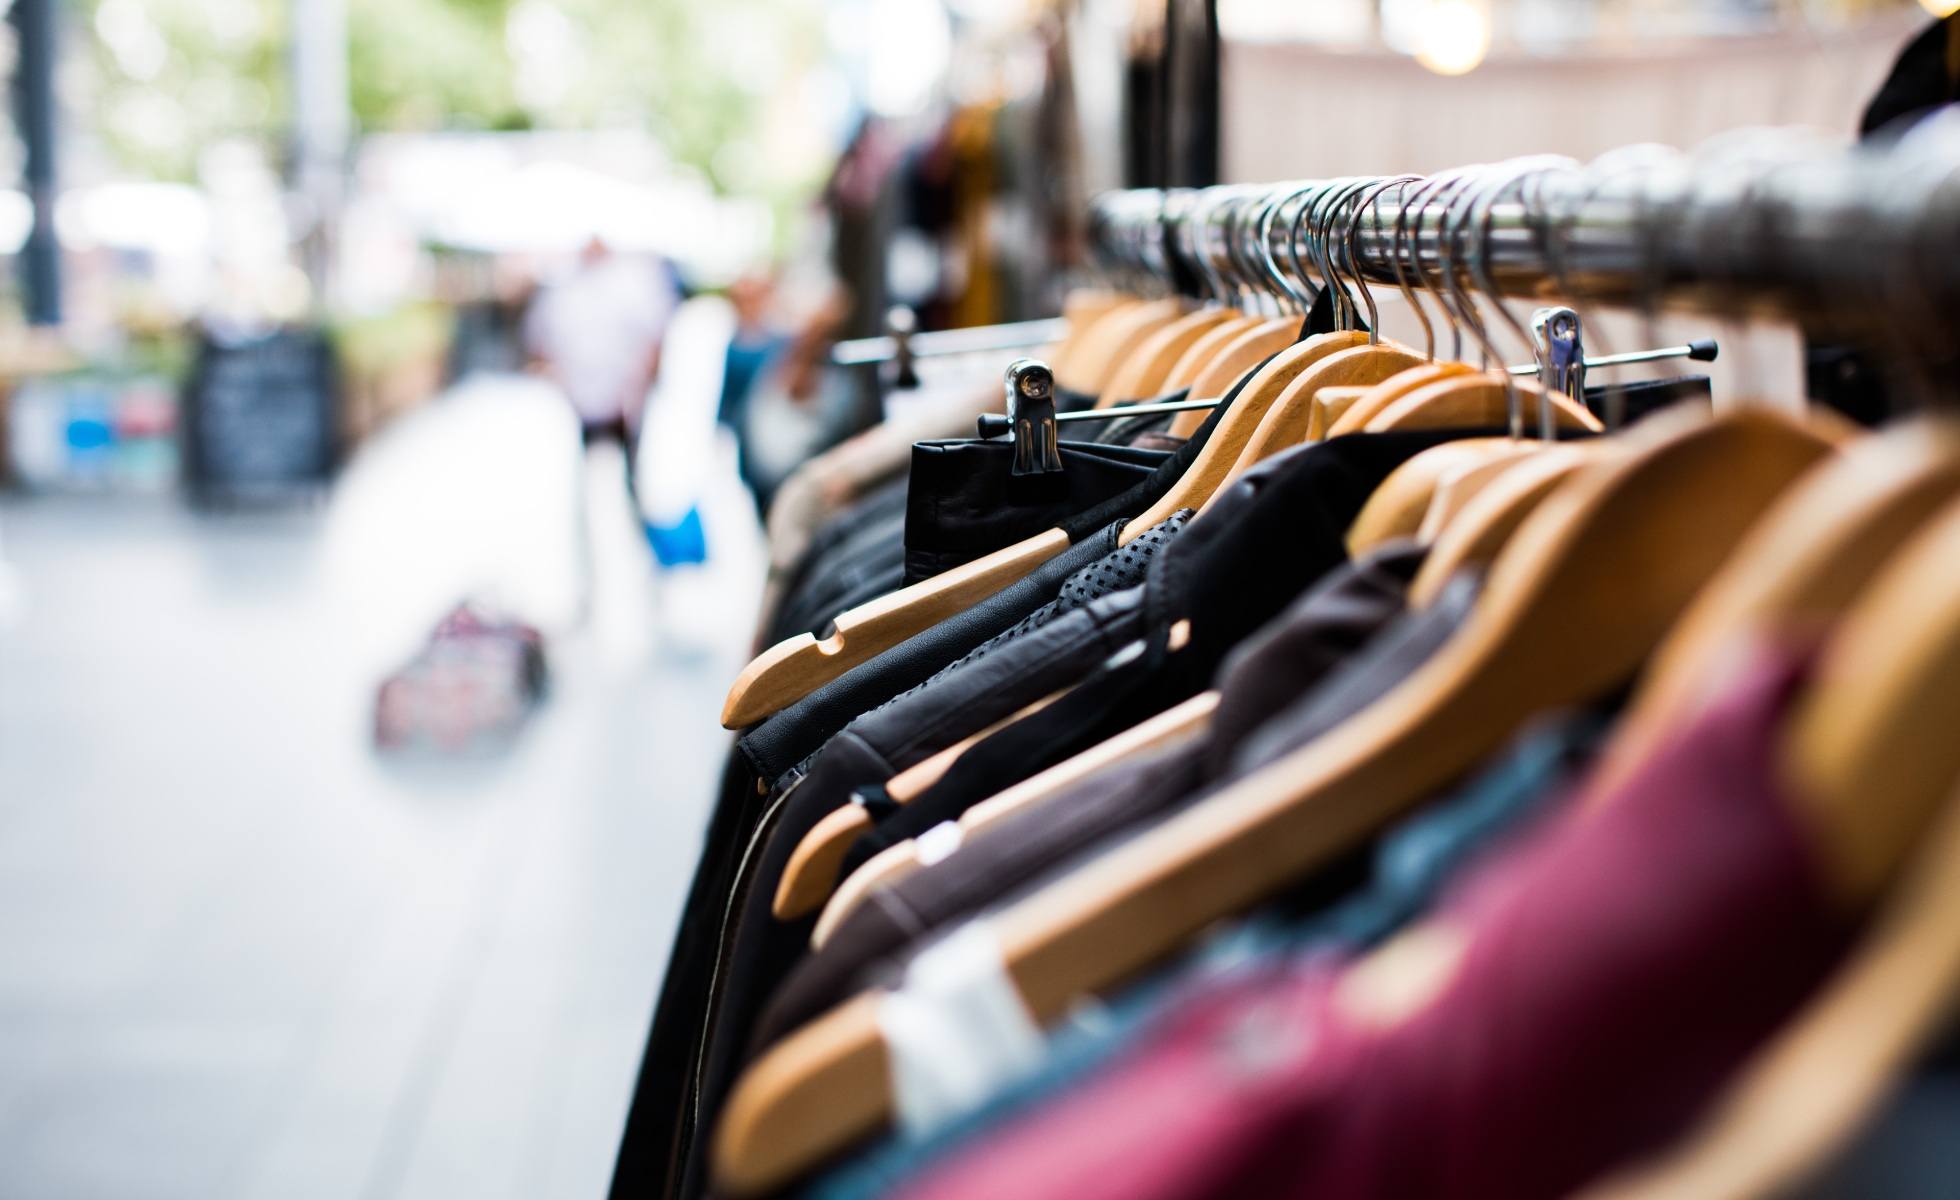 What are the advantages of consignment stores?